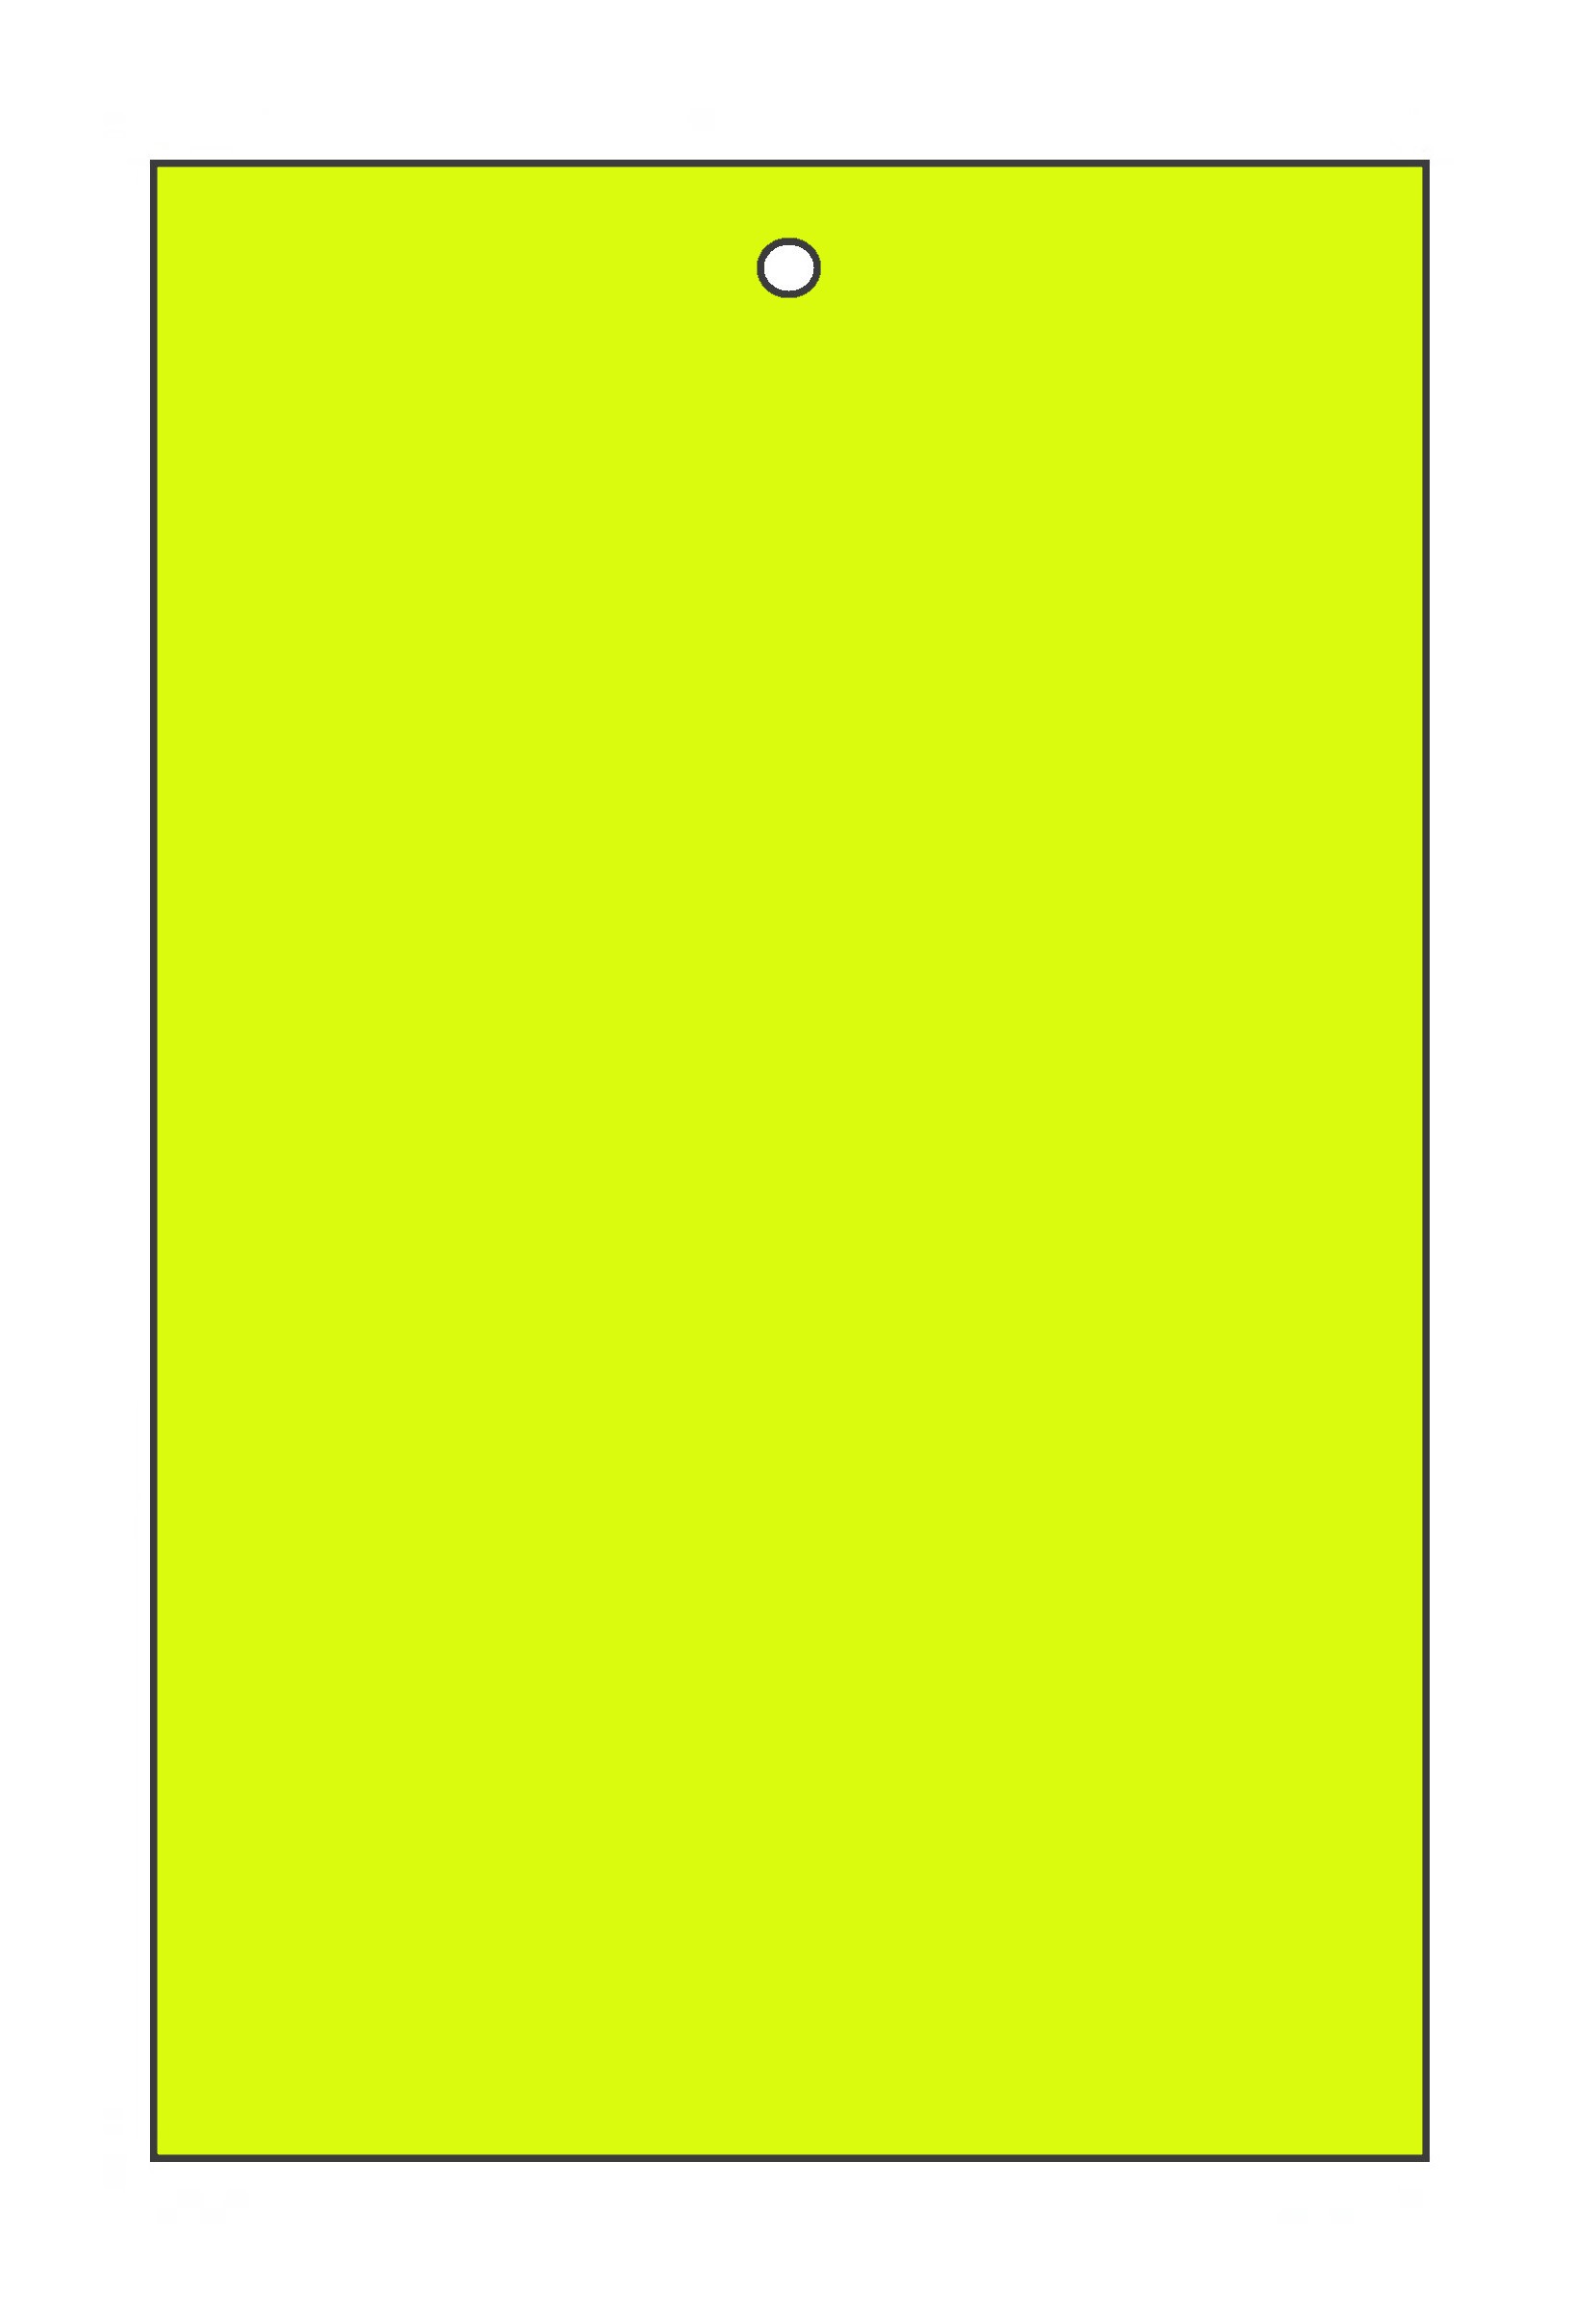  Blank Cards Tags Bright Yellow Fluorescent Chartreuse with hole, no string